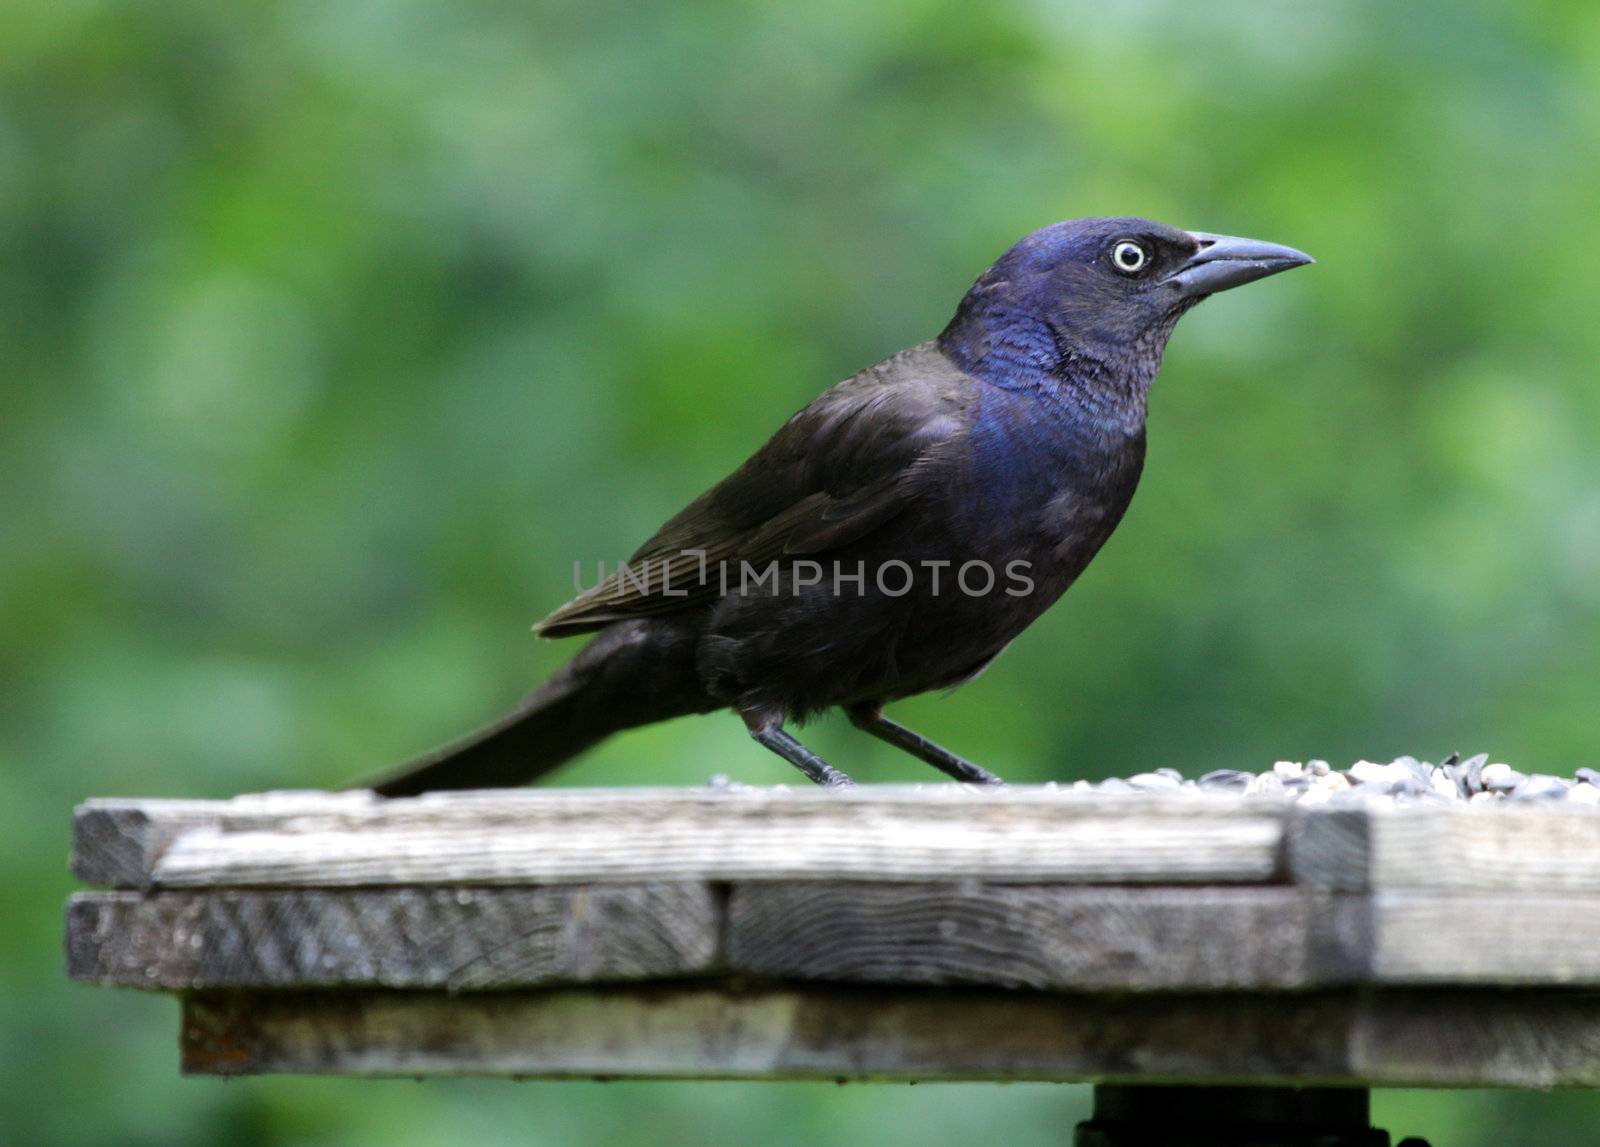 A Common Grackle (Quiscalus quiscula) sitting at a bird feeder.